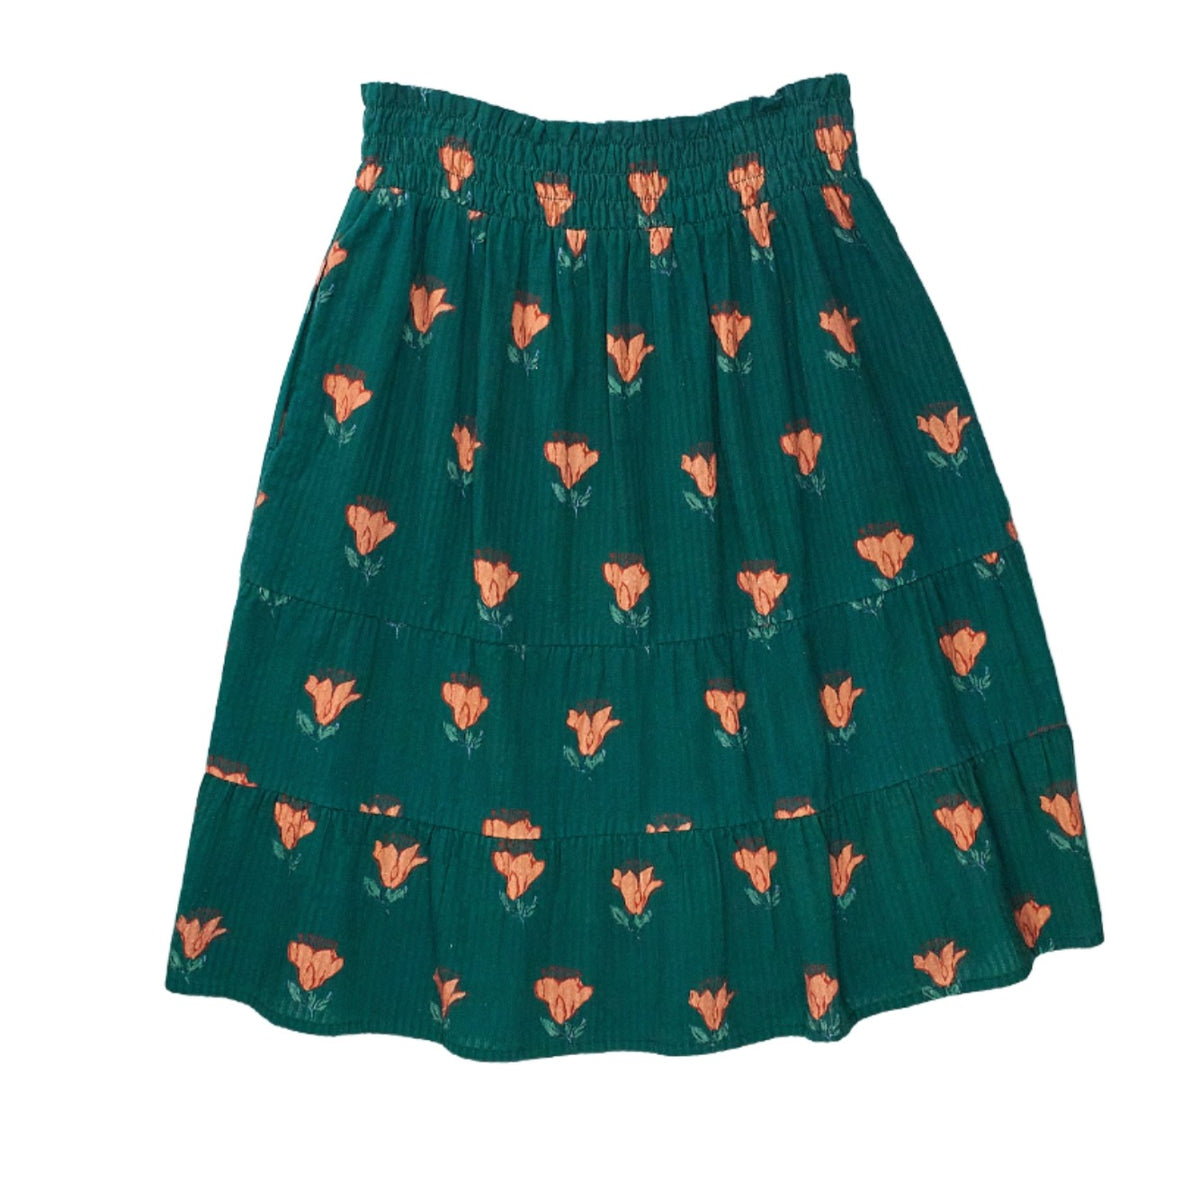 YMC Green Floral Tiered Skirt